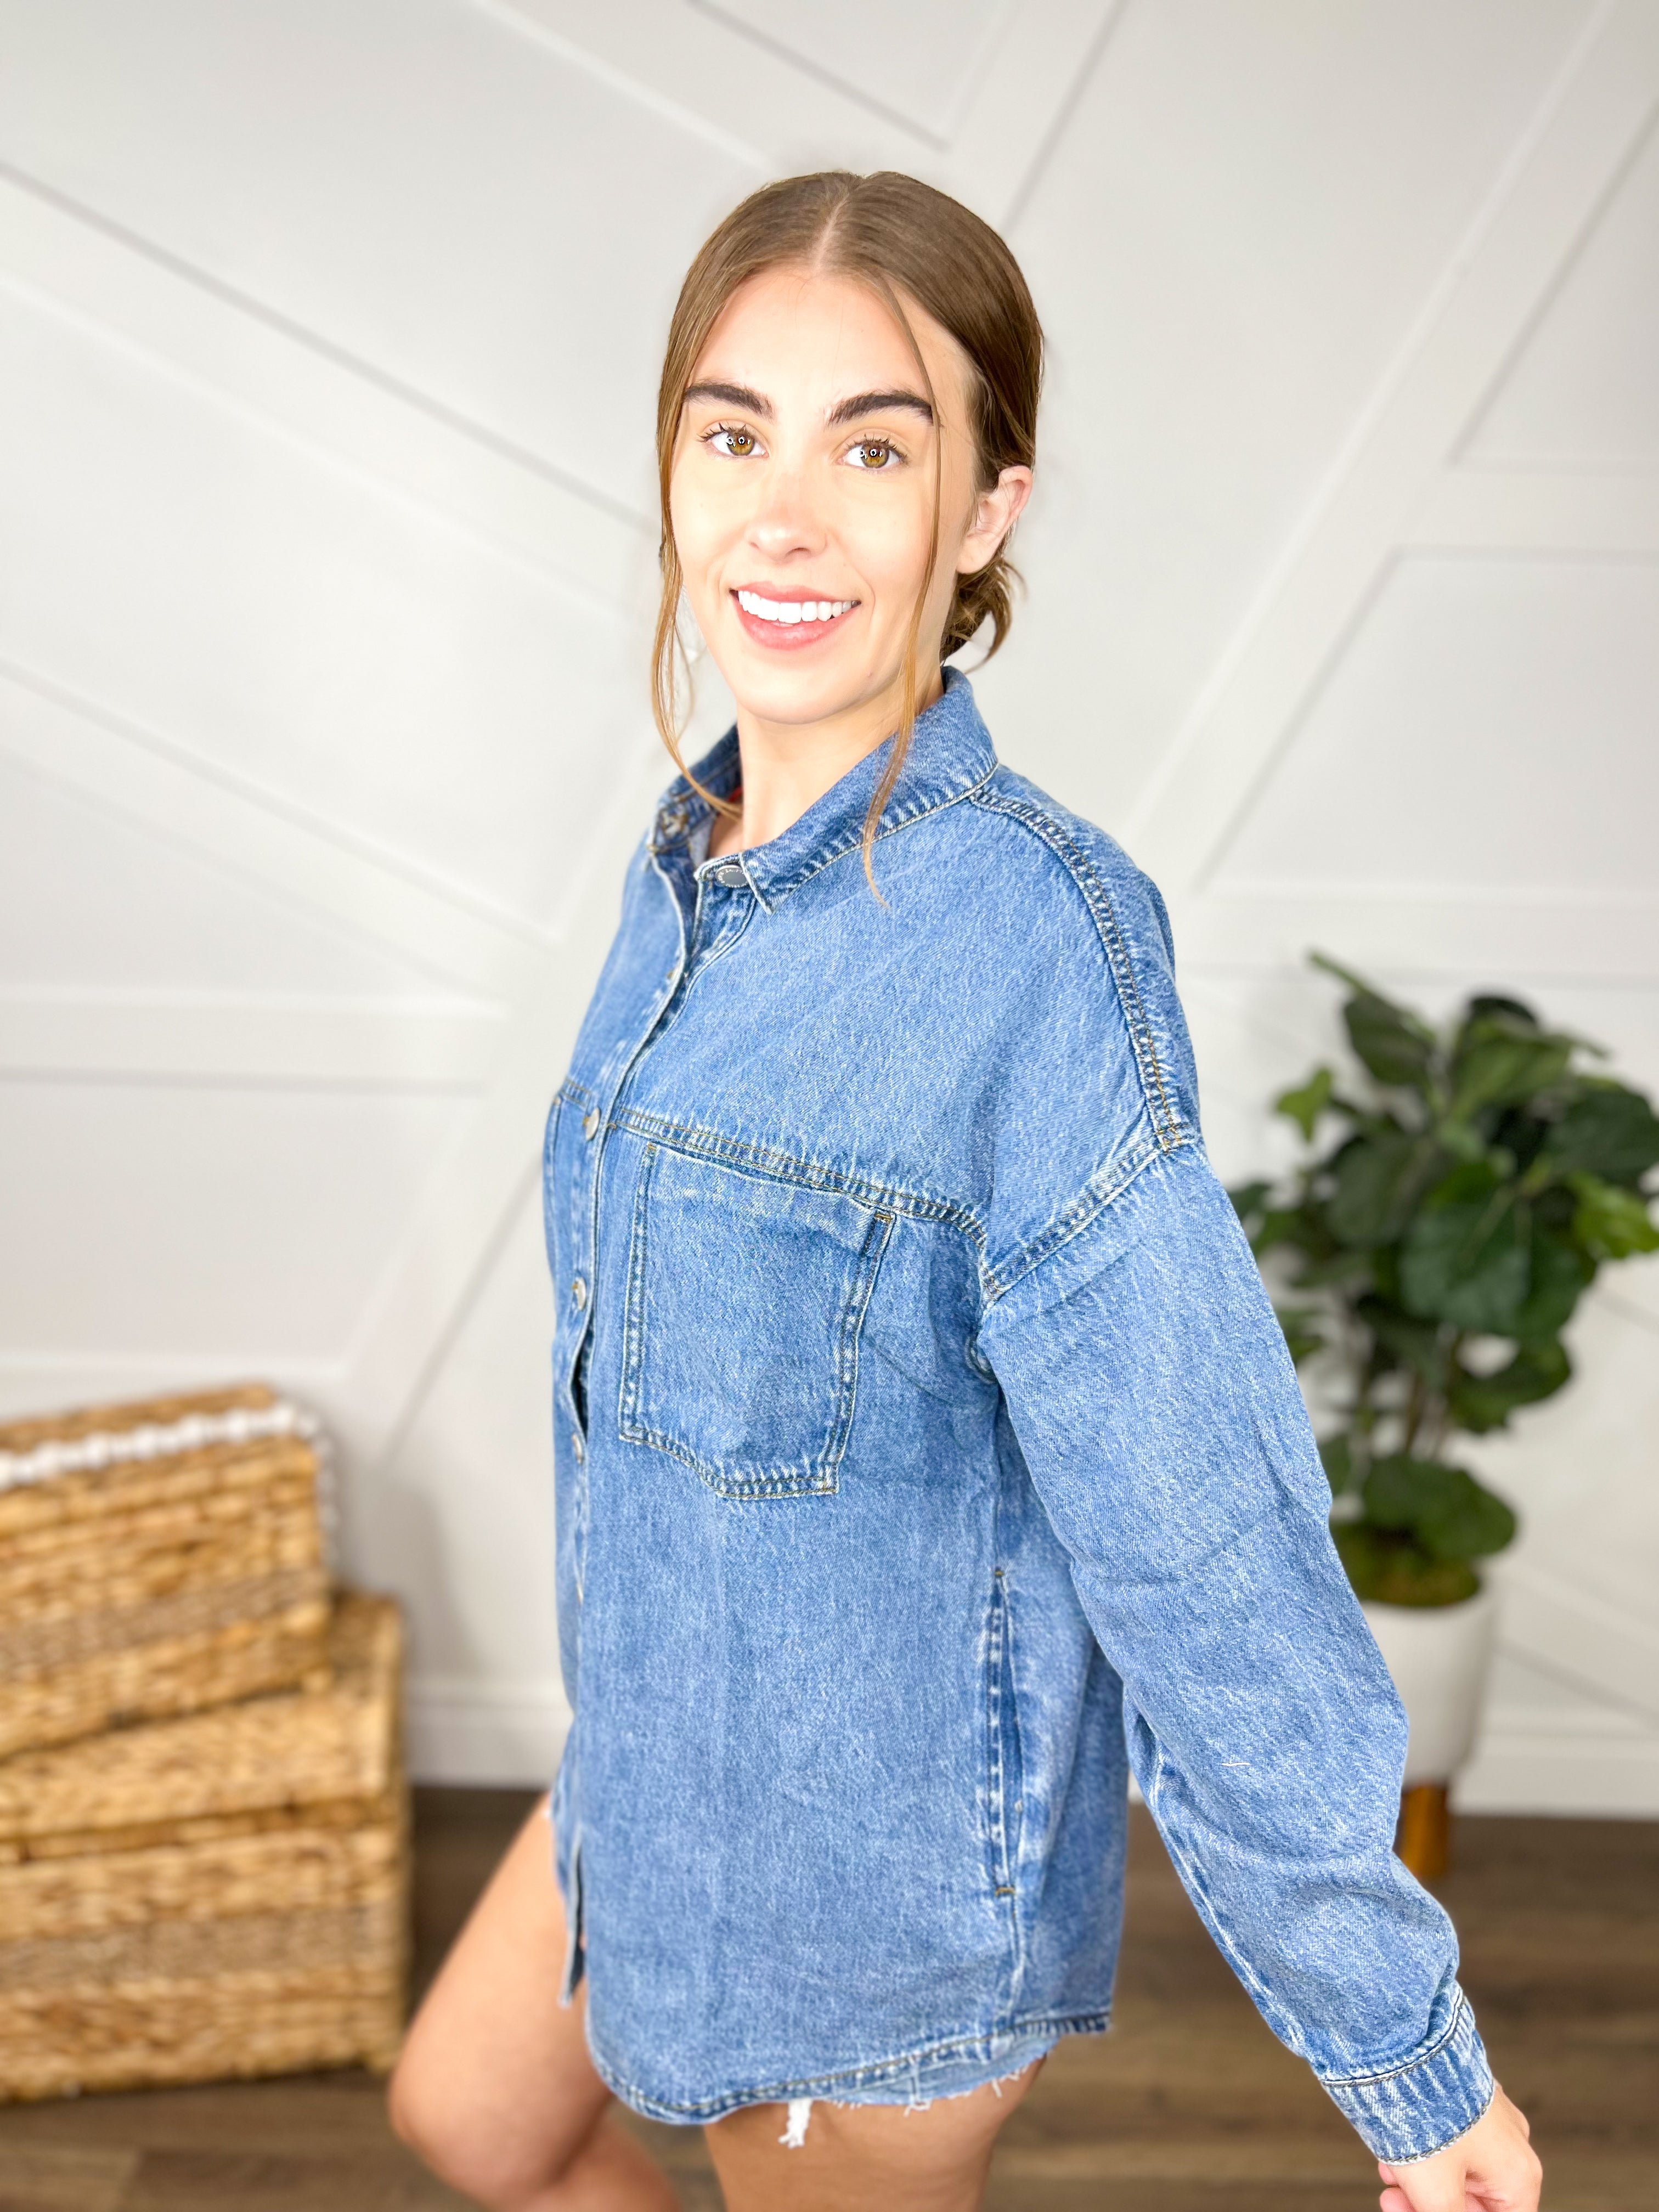 One Thing Denim Shacket-200 Jackets/Shackets-Risen Jeans-Heathered Boho Boutique, Women's Fashion and Accessories in Palmetto, FL